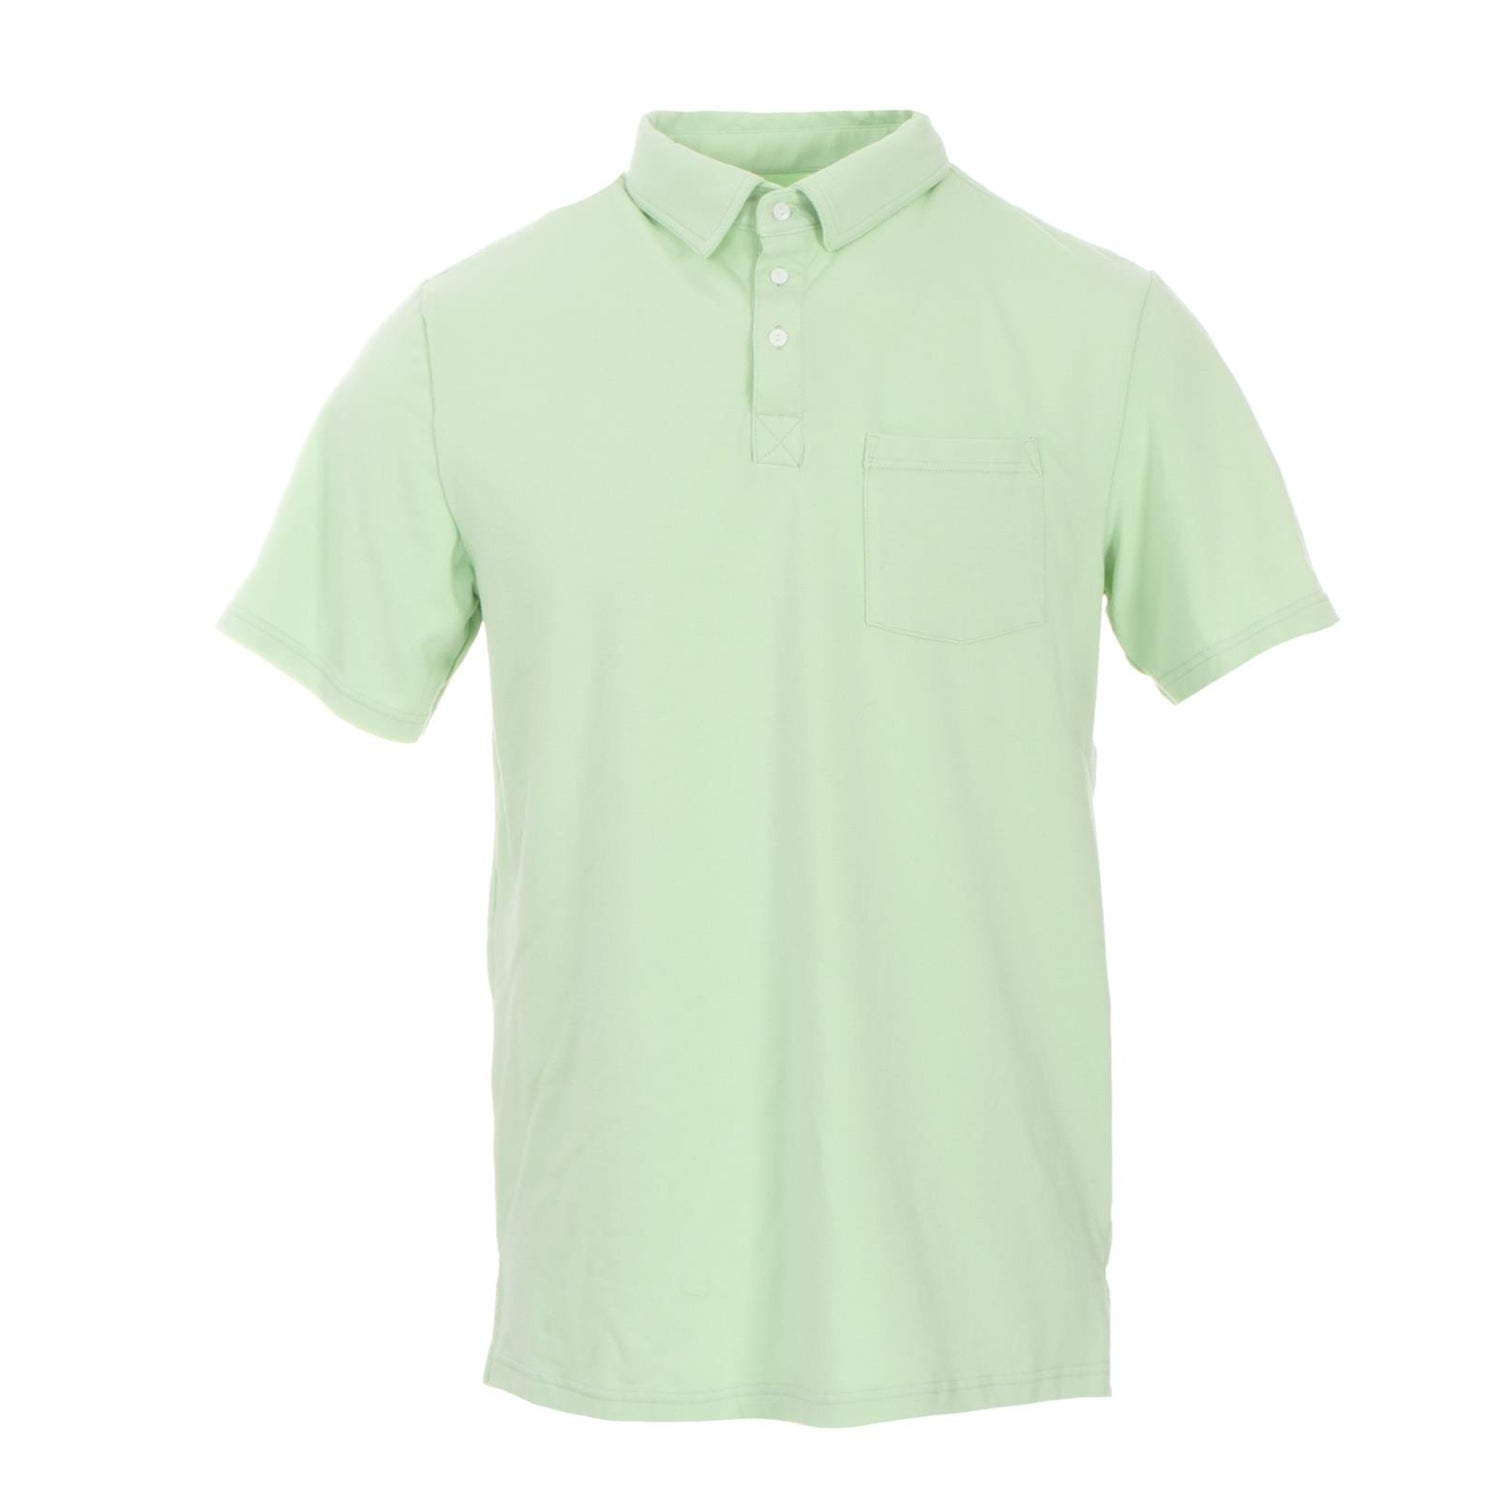 Men's Short Sleeve Luxe Jersey Polo with Pocket in Pistachio